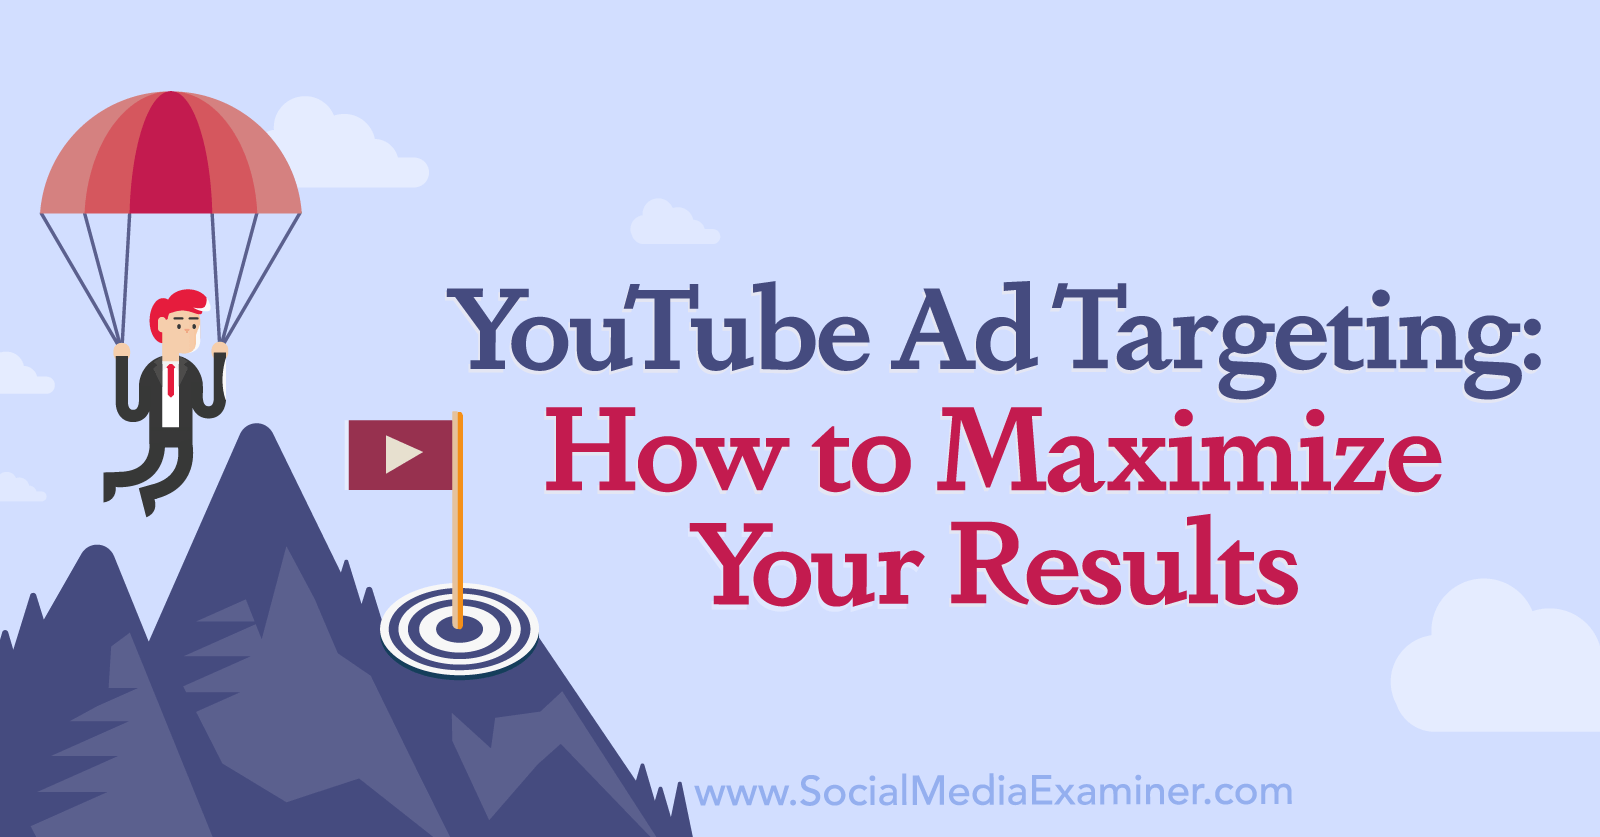 YouTube Ad Targeting: How to Maximize Your Results by Social Media Examiner